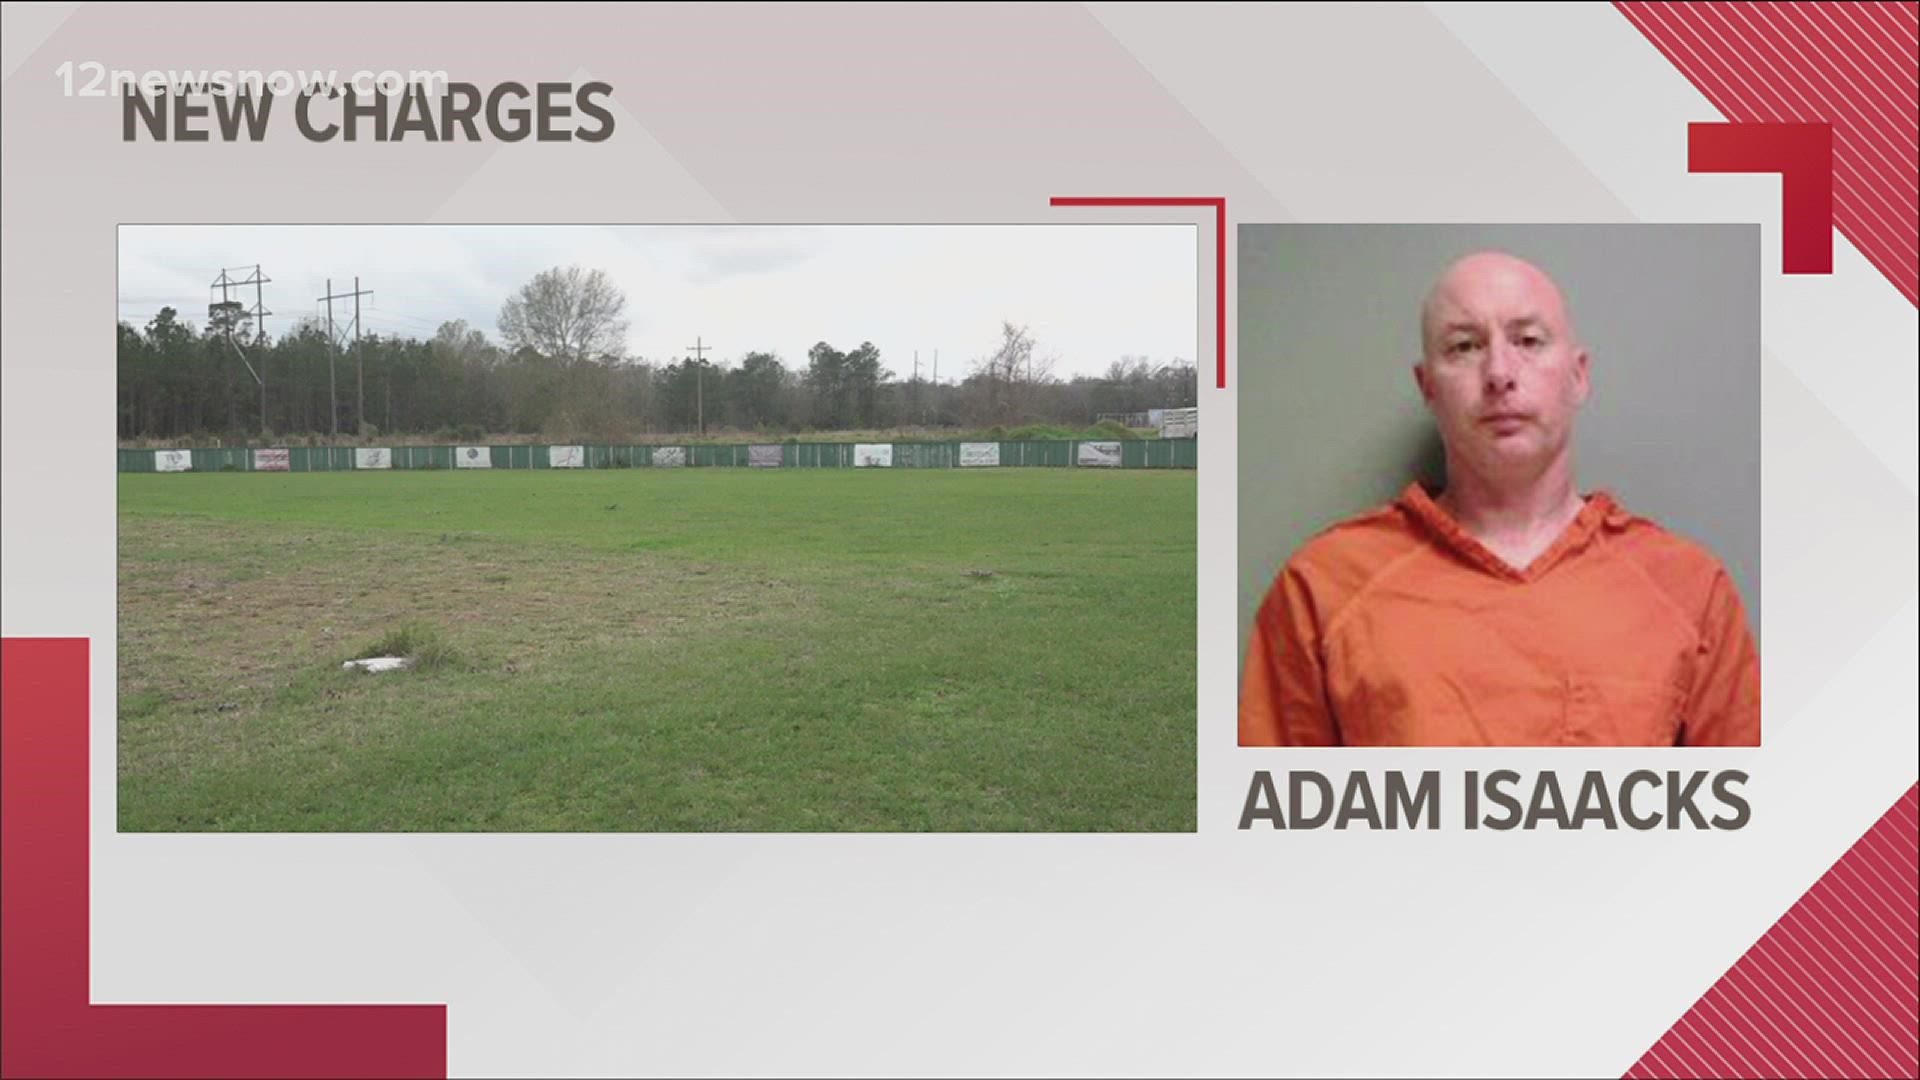 He's charged with three new charges of continuous sex abuse of a child in Sabine County.